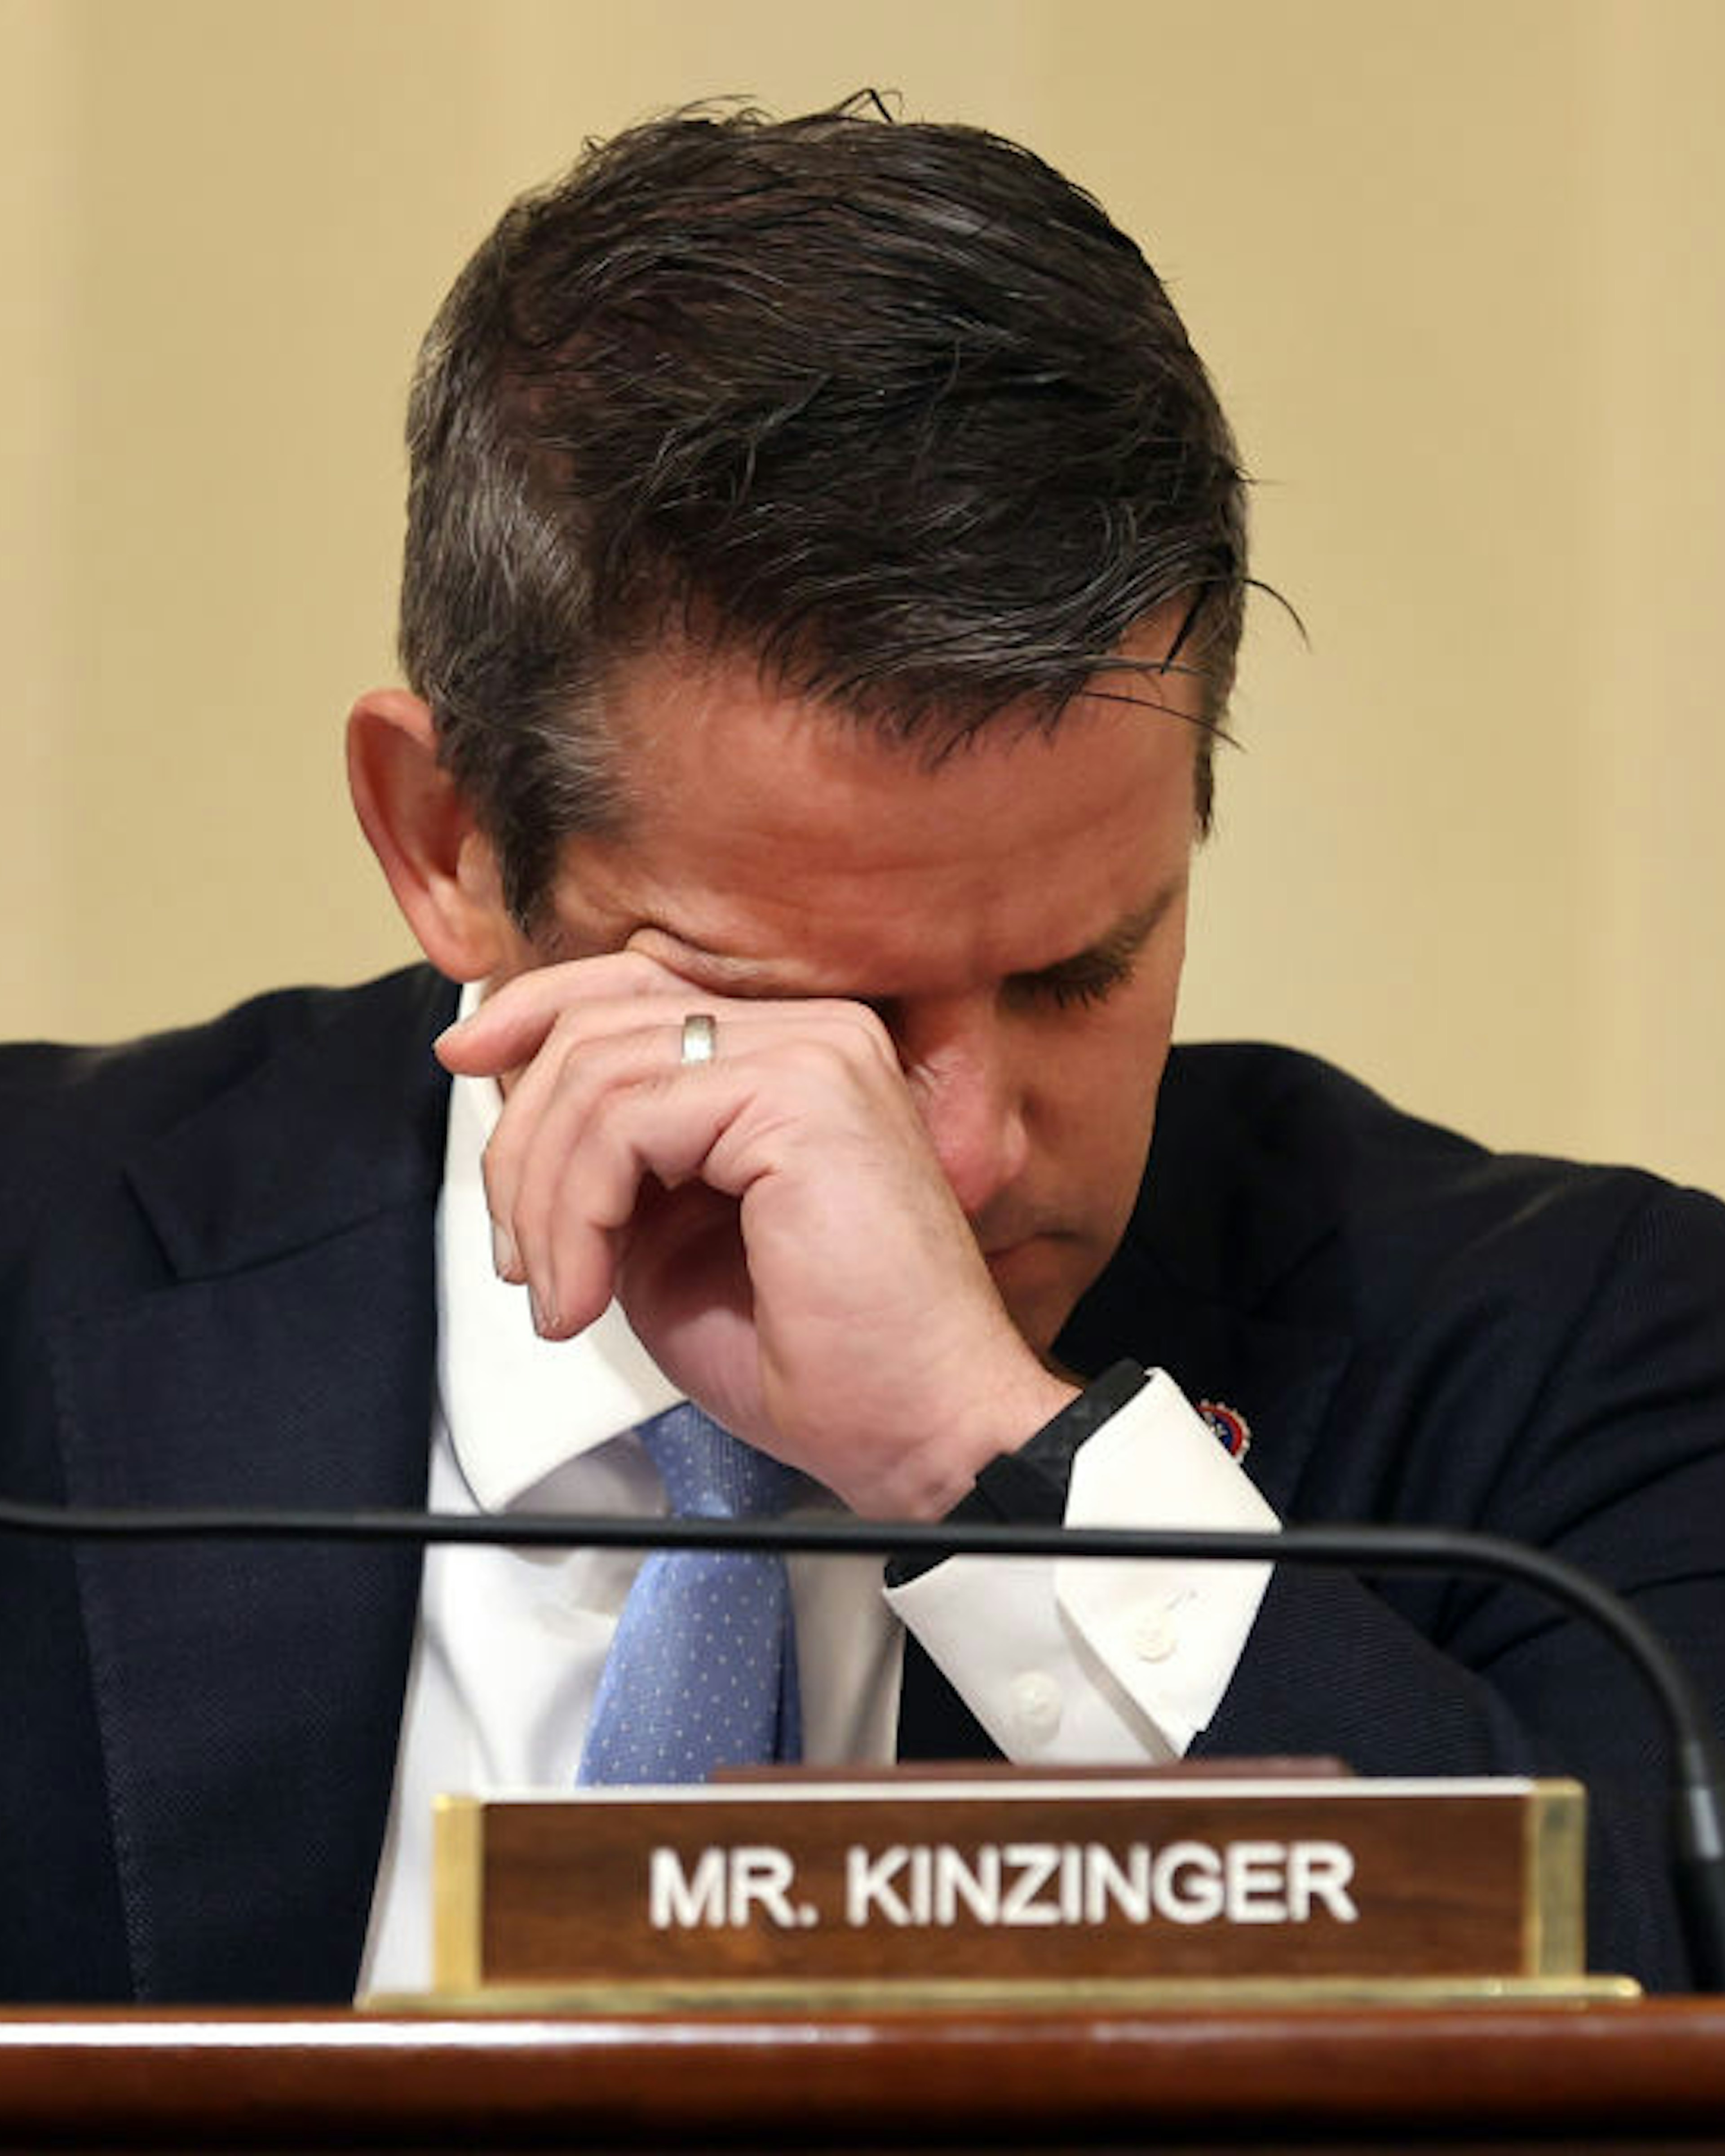 WASHINGTON, DC - JULY 27: U.S. Rep. Adam Kinzinger (R-IL) wipes his eyes as he listens to testimony during a hearing by the House Select Committee investigating the January 6 attack on the U.S. Capitol on July 27, 2021 at the Cannon House Office Building in Washington, DC. Members of law enforcement testified about the attack by supporters of former President Donald Trump on the U.S. Capitol. According to authorities, about 140 police officers were injured when they were trampled, had objects thrown at them, and sprayed with chemical irritants during the insurrection. (Photo by Chip Somodevilla/Getty Images)